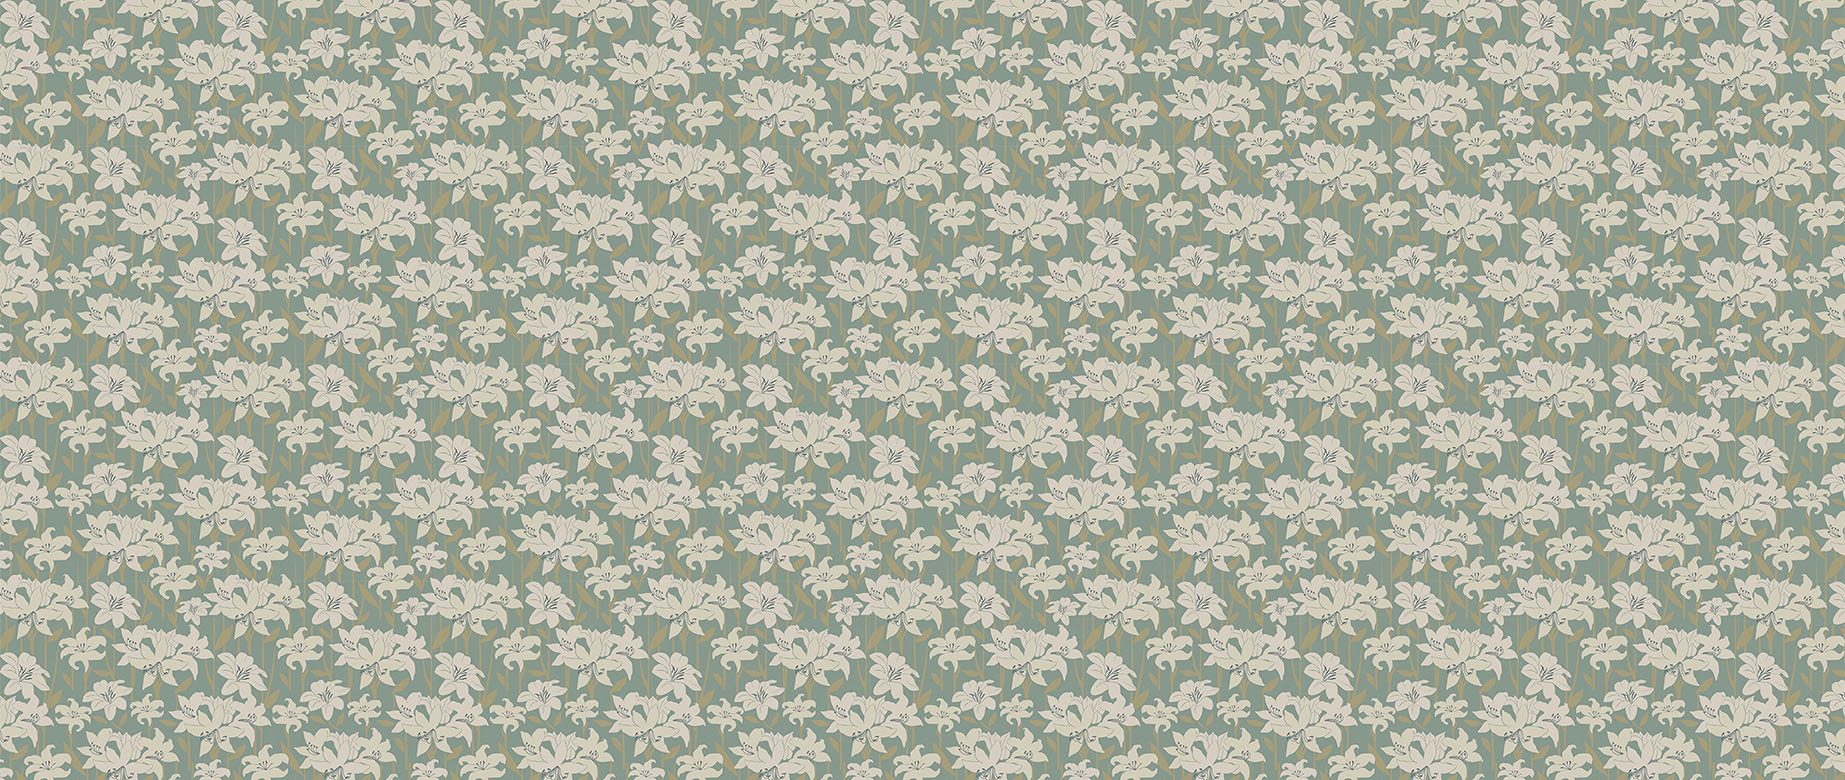 beige-lilly-on-green-background-wallpaper-wide-view